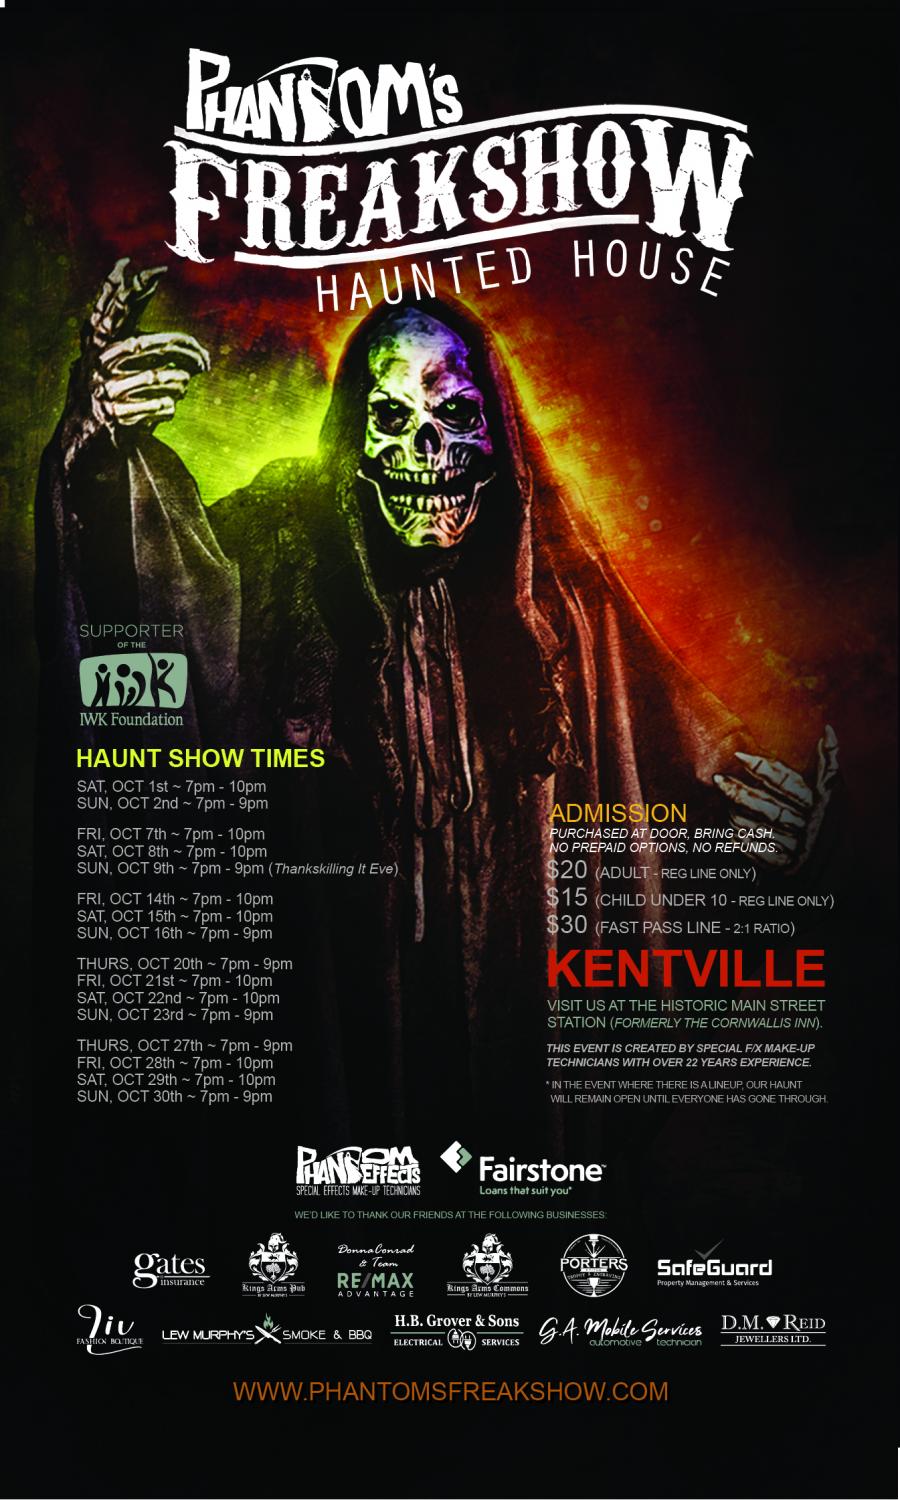 a poster advertises the dates and times of the Phantom Freakshow Haunted House